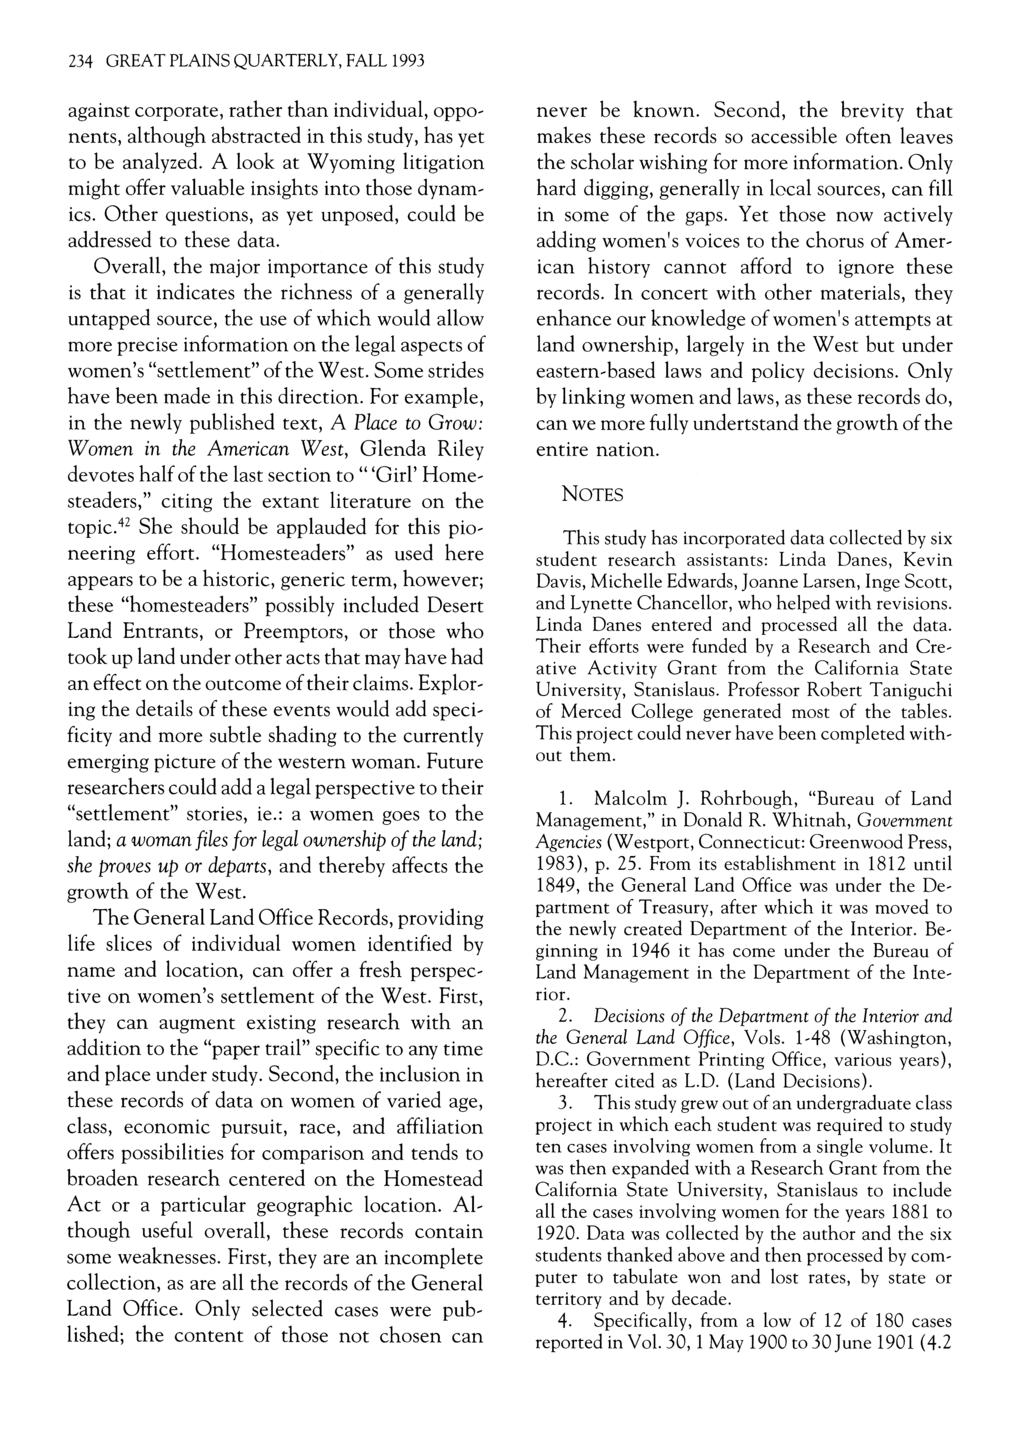 234 GREAT PLAINS QUARTERLY, FALL 1993 against corporate, rather than individual, opponents, although abstracted in this study, has yet to be analyzed.